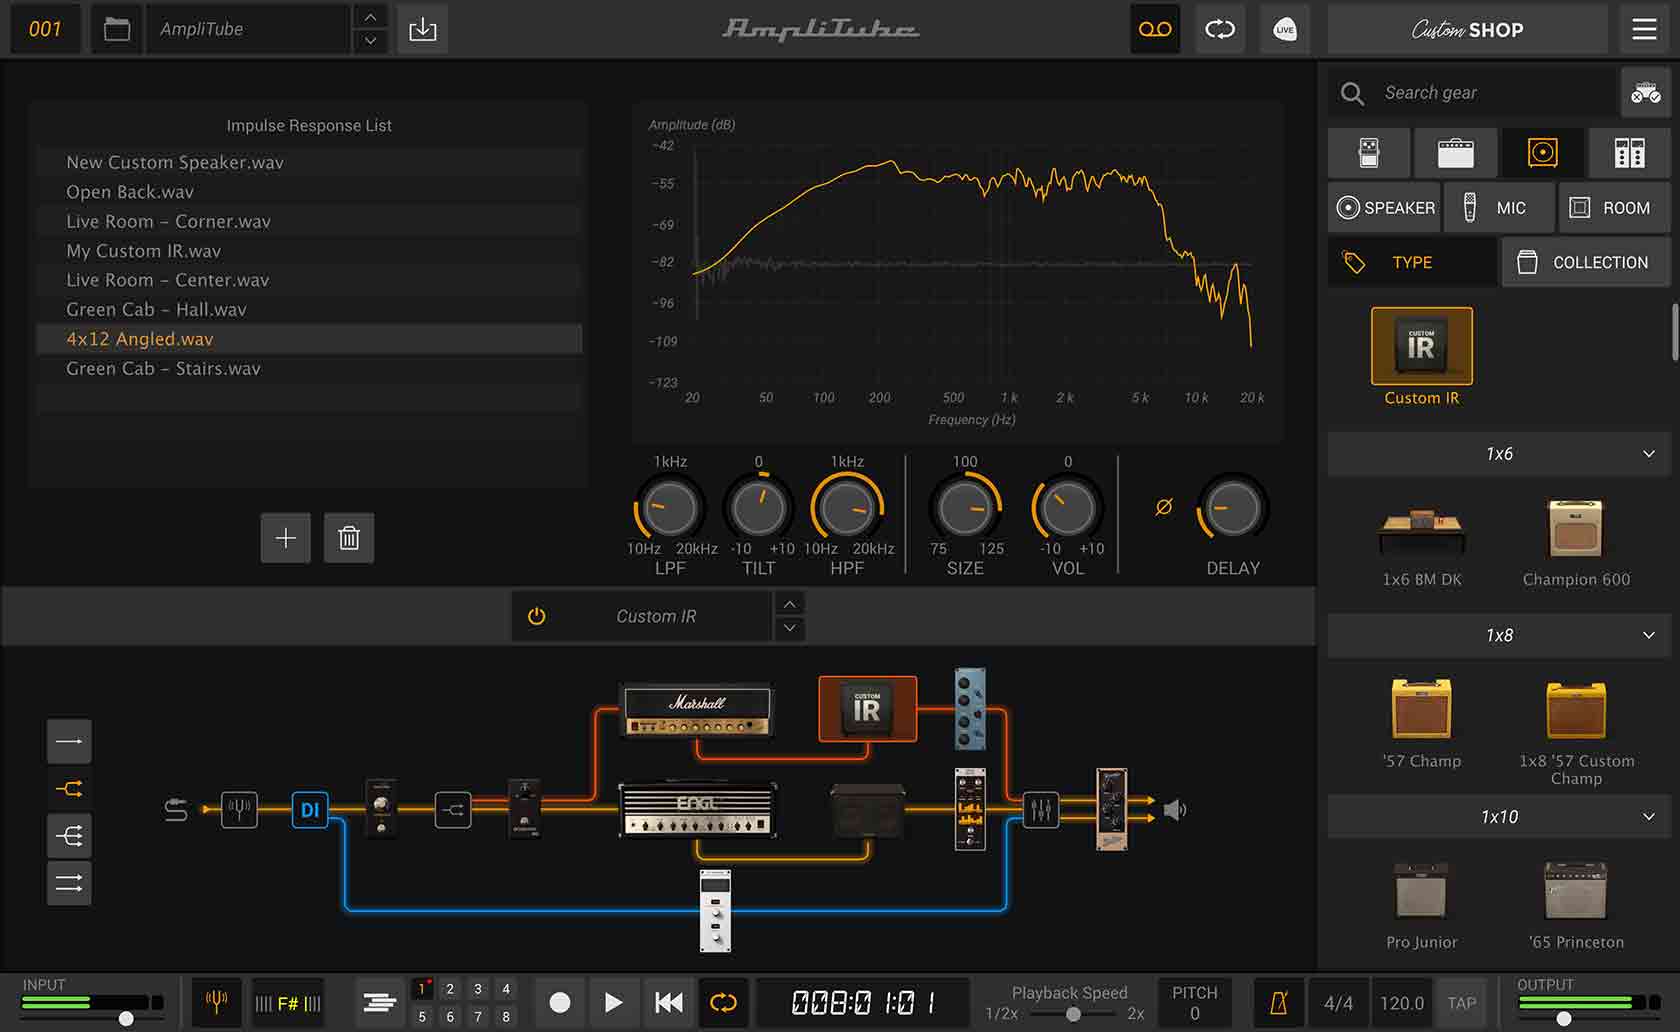 download the new version AmpliTube 5.7.0